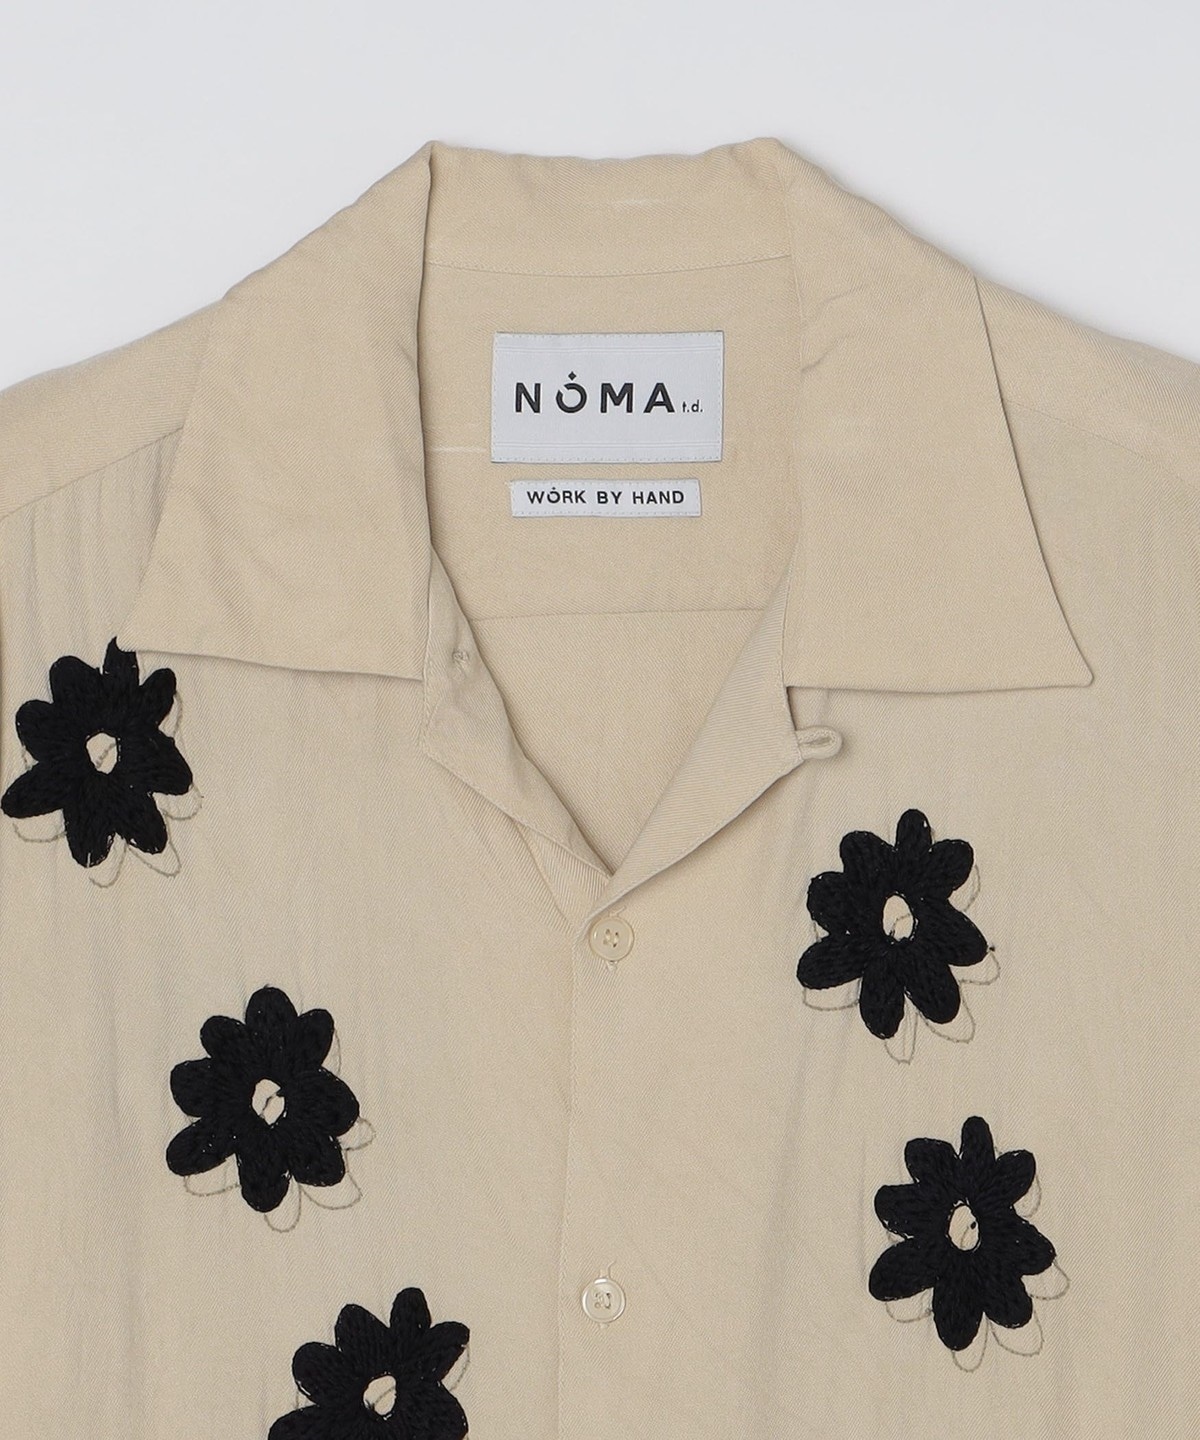 NOMA t.d.: FLORAL HAND EMBROIDERY SHIRT: シャツ/ブラウス SHIPS